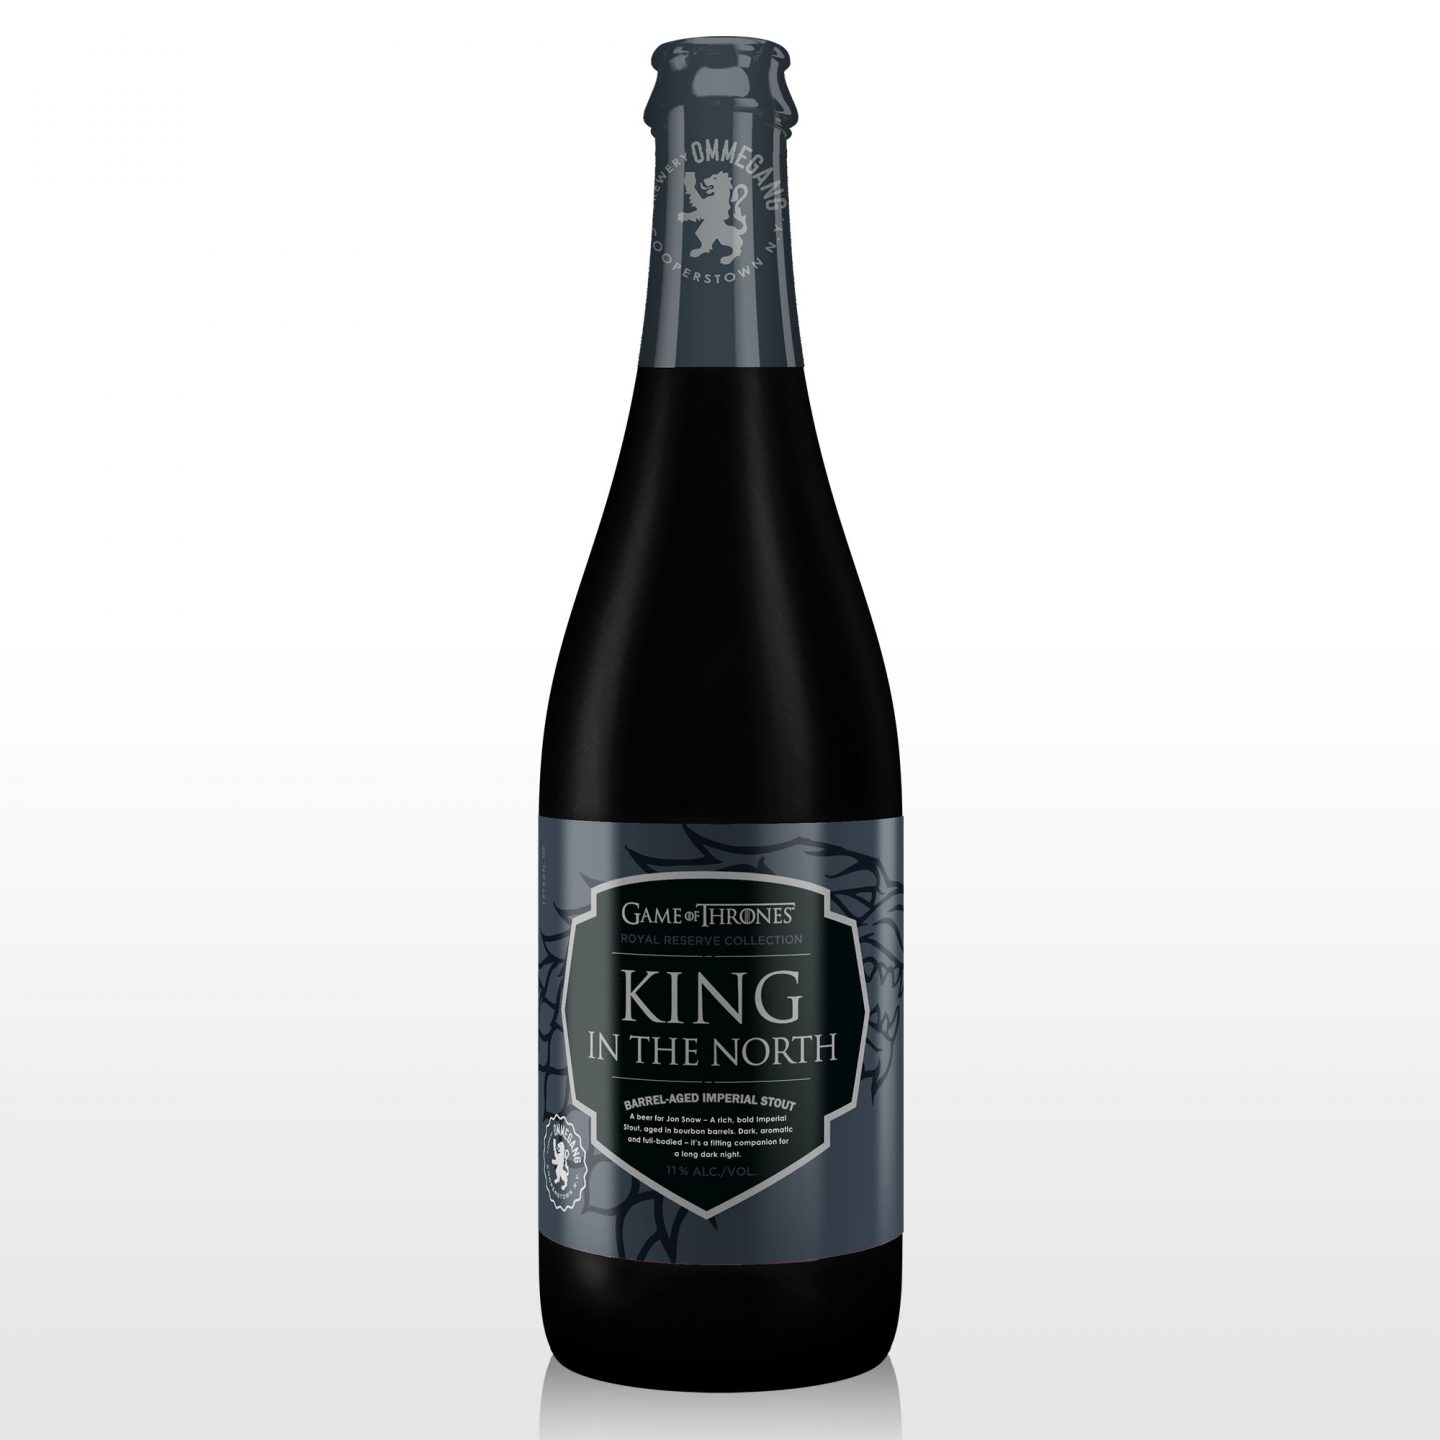 King In The North bottle (Brewery Ommegang)